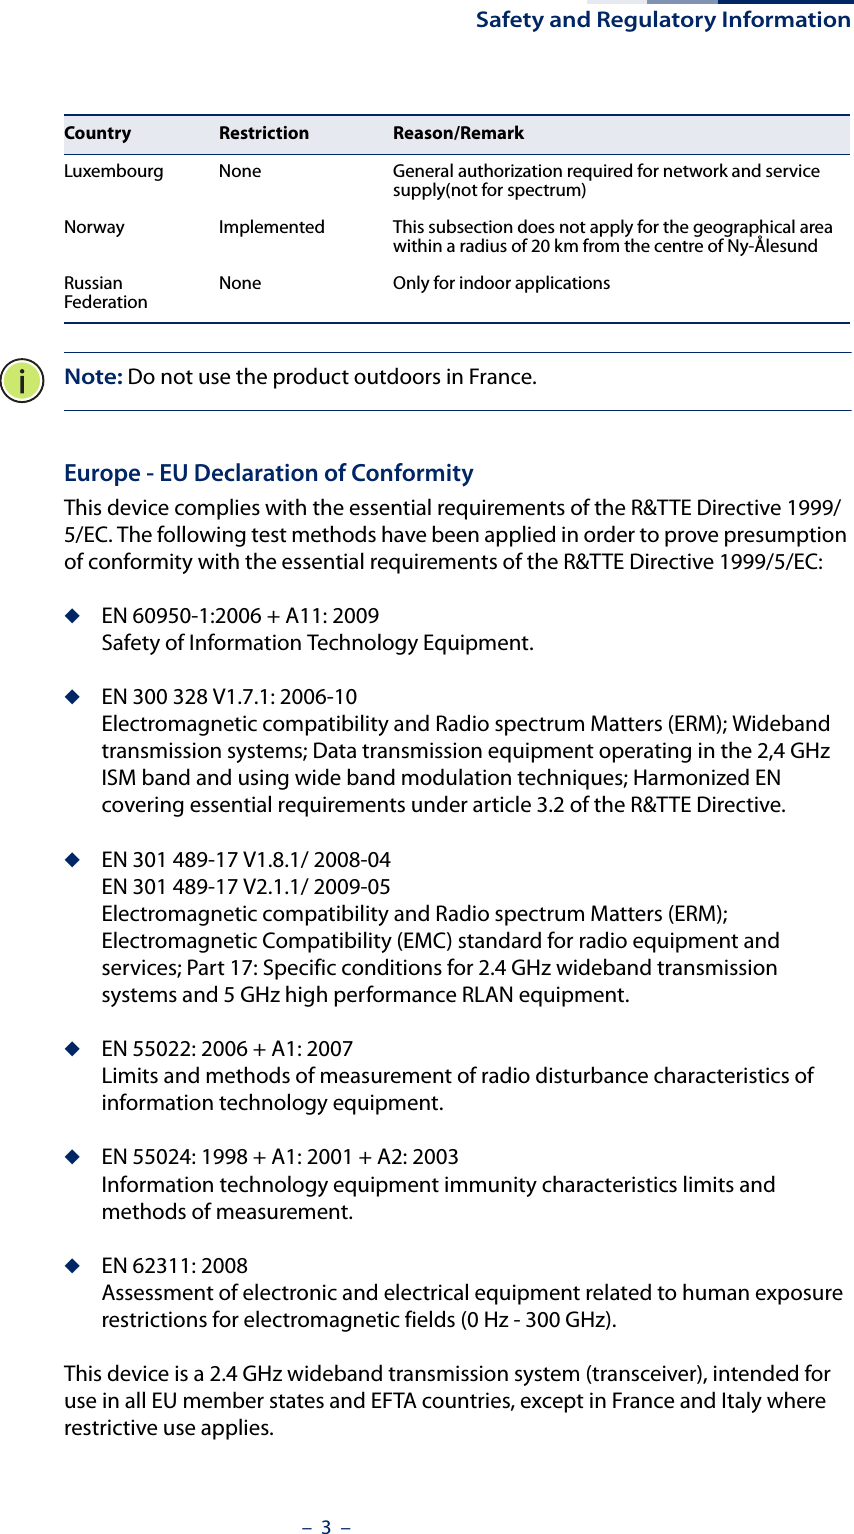 Safety and Regulatory Information–  3  –Note: Do not use the product outdoors in France.Europe - EU Declaration of ConformityThis device complies with the essential requirements of the R&amp;TTE Directive 1999/5/EC. The following test methods have been applied in order to prove presumption of conformity with the essential requirements of the R&amp;TTE Directive 1999/5/EC:◆EN 60950-1:2006 + A11: 2009Safety of Information Technology Equipment.◆EN 300 328 V1.7.1: 2006-10Electromagnetic compatibility and Radio spectrum Matters (ERM); Wideband transmission systems; Data transmission equipment operating in the 2,4 GHz ISM band and using wide band modulation techniques; Harmonized EN covering essential requirements under article 3.2 of the R&amp;TTE Directive.◆EN 301 489-17 V1.8.1/ 2008-04EN 301 489-17 V2.1.1/ 2009-05Electromagnetic compatibility and Radio spectrum Matters (ERM); Electromagnetic Compatibility (EMC) standard for radio equipment and services; Part 17: Specific conditions for 2.4 GHz wideband transmission systems and 5 GHz high performance RLAN equipment.◆EN 55022: 2006 + A1: 2007Limits and methods of measurement of radio disturbance characteristics of information technology equipment.◆EN 55024: 1998 + A1: 2001 + A2: 2003Information technology equipment immunity characteristics limits and methods of measurement.◆EN 62311: 2008Assessment of electronic and electrical equipment related to human exposure restrictions for electromagnetic fields (0 Hz - 300 GHz).This device is a 2.4 GHz wideband transmission system (transceiver), intended for use in all EU member states and EFTA countries, except in France and Italy where restrictive use applies.Luxembourg None General authorization required for network and service supply(not for spectrum)Norway Implemented This subsection does not apply for the geographical area within a radius of 20 km from the centre of Ny-ÅlesundRussian Federation None Only for indoor applicationsCountry Restriction Reason/Remark